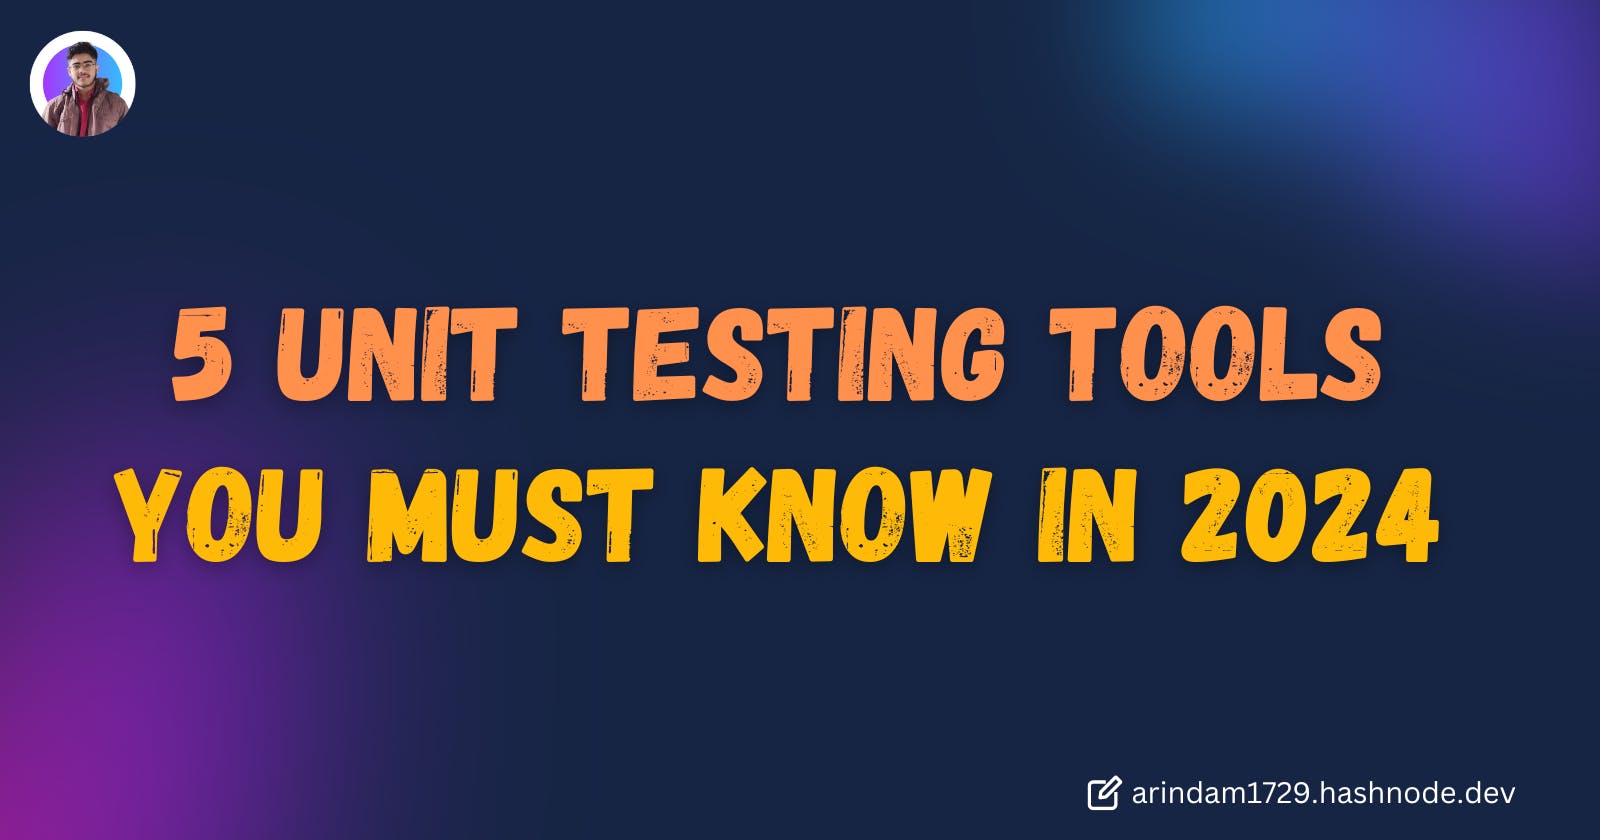 5 Unit Testing Tools You Must Know in 2024